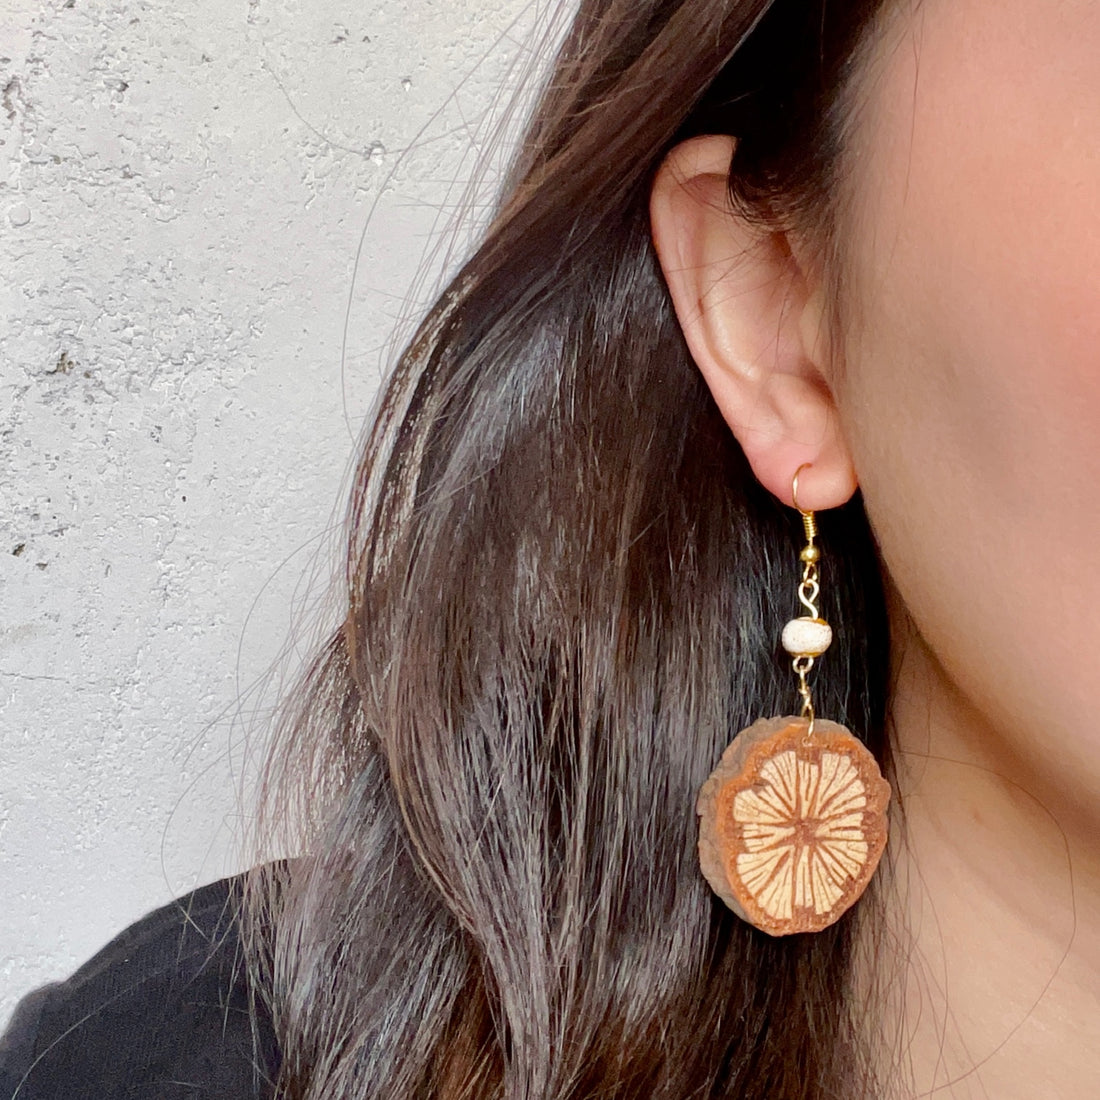 Understanding the New Pricing for Our Fruit Earrings